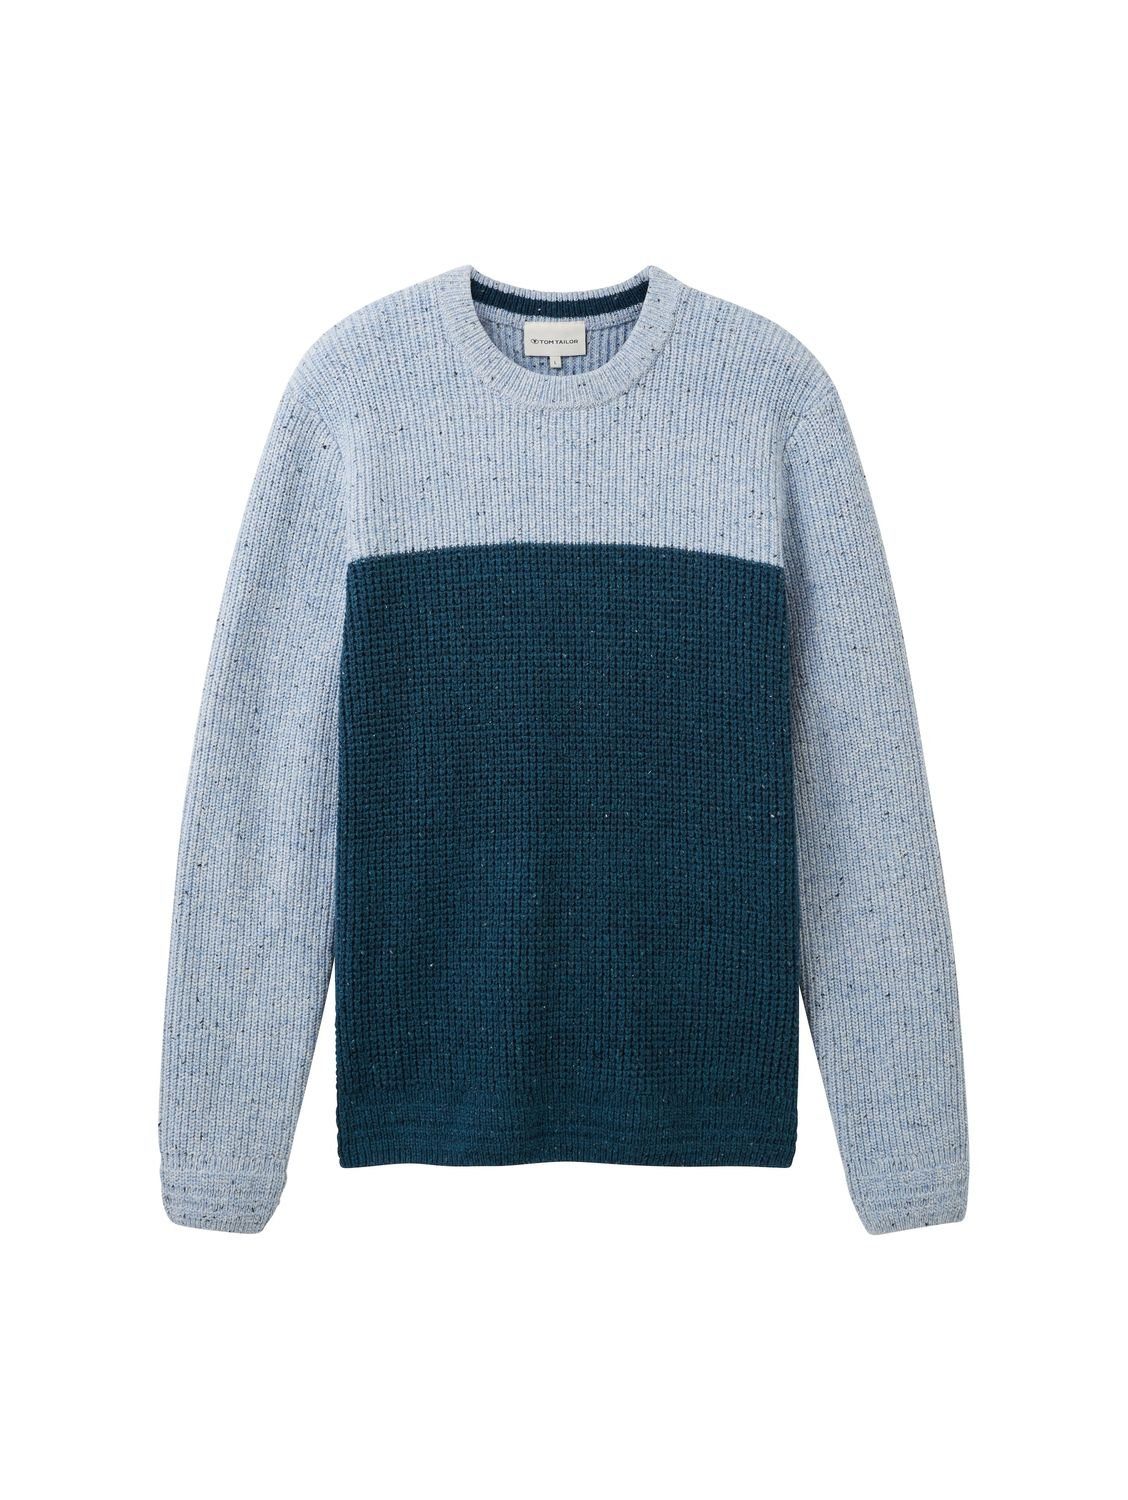 TOM TAILOR Strickpullover NEP STRUCTURED aus Baumwollmix Middle blue neps colorblock 34153